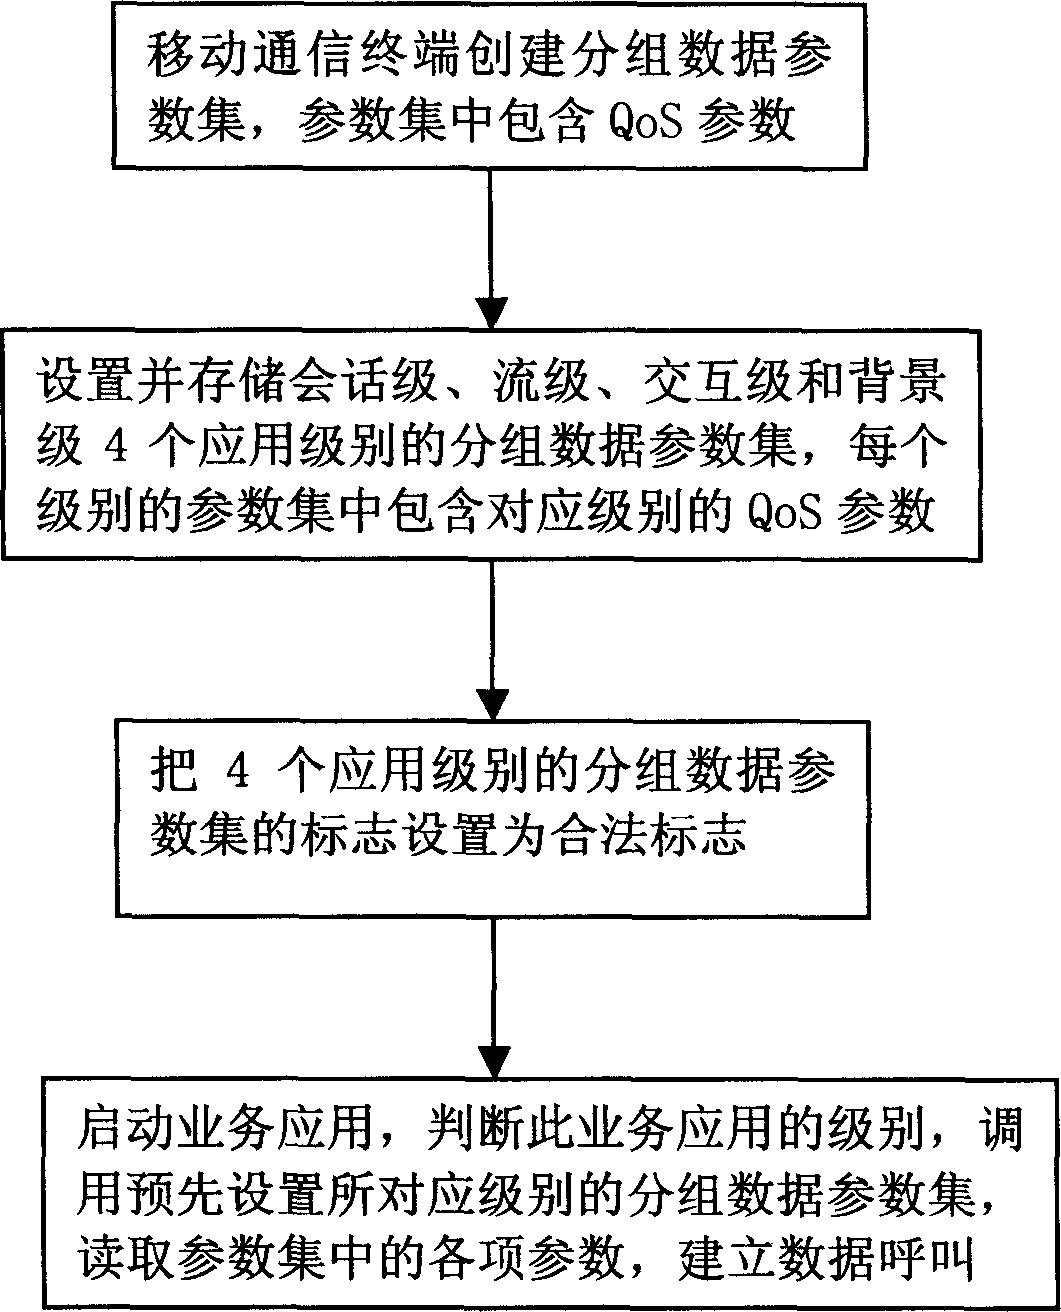 Method for automatically setting QoS service quality parameters of 3G mobile communication terminal